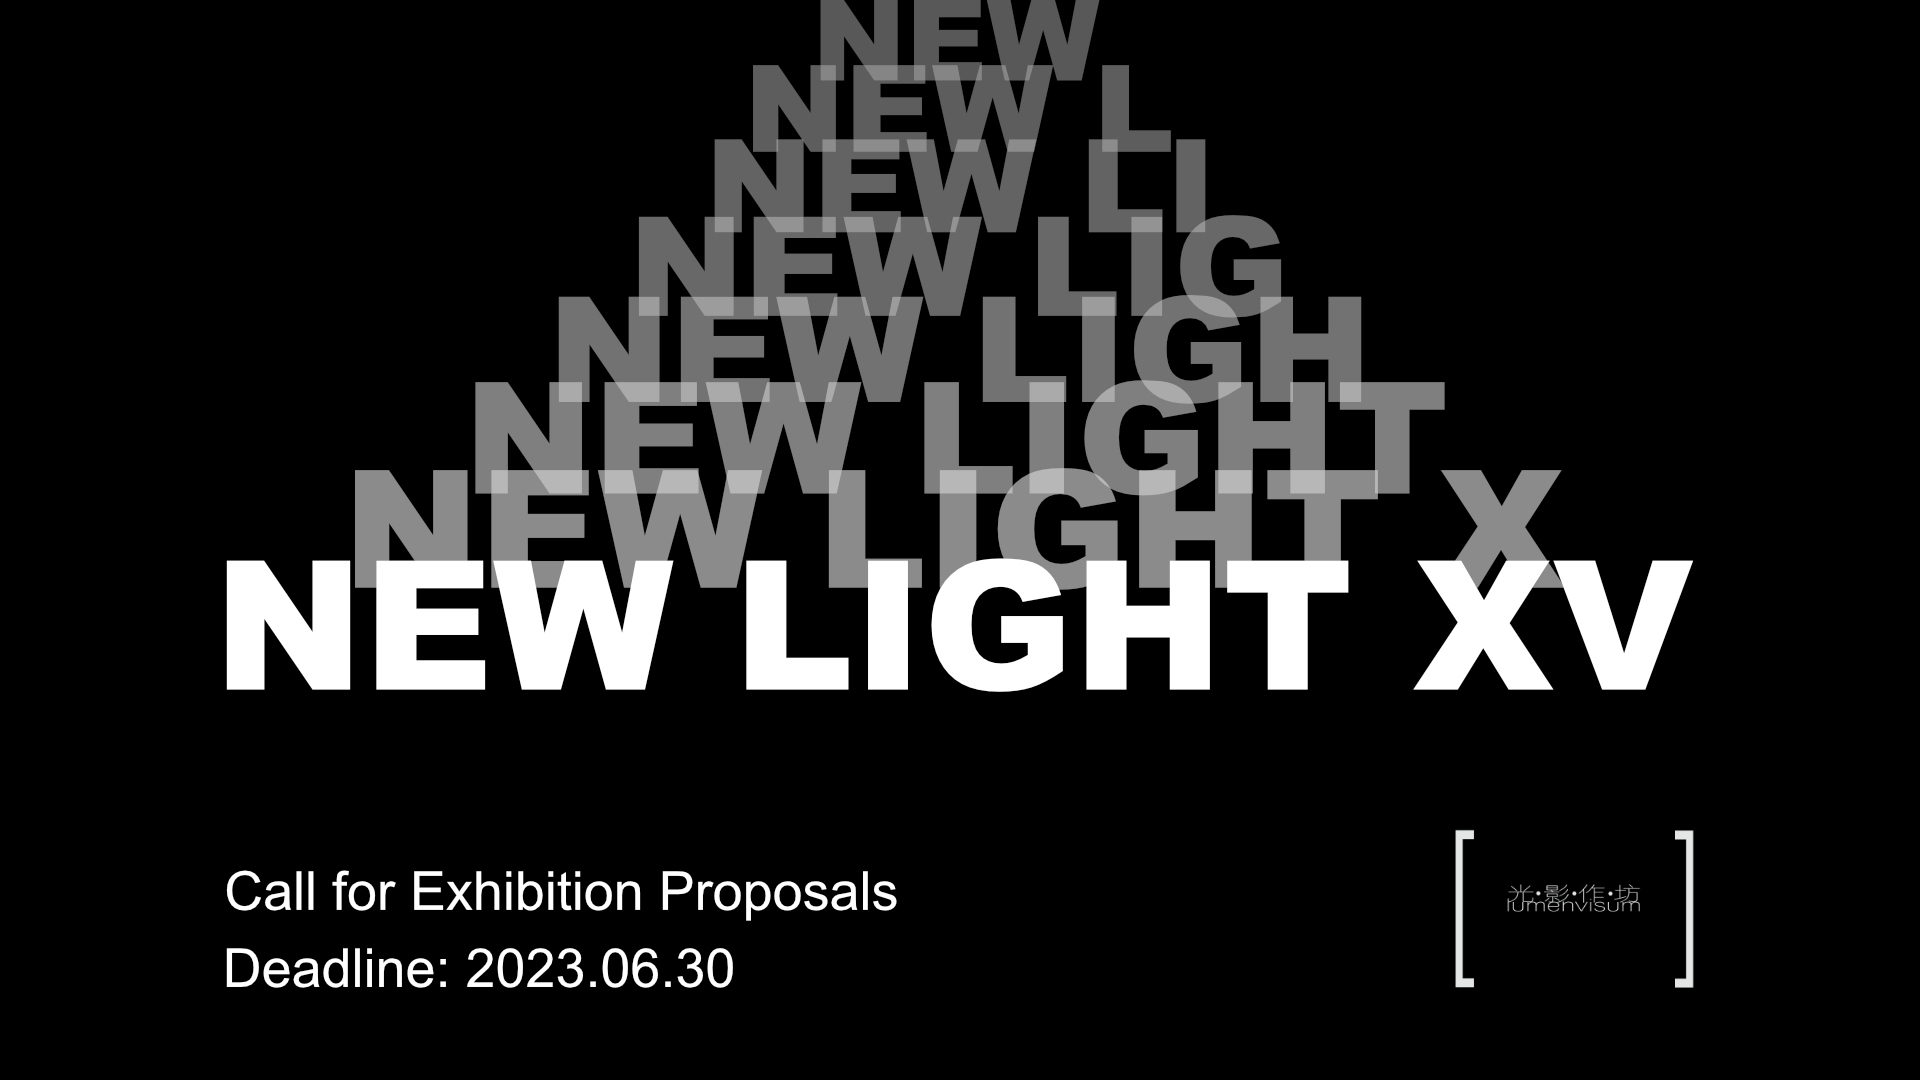 NEW LIGHT XV: Call for Exhibition Proposals